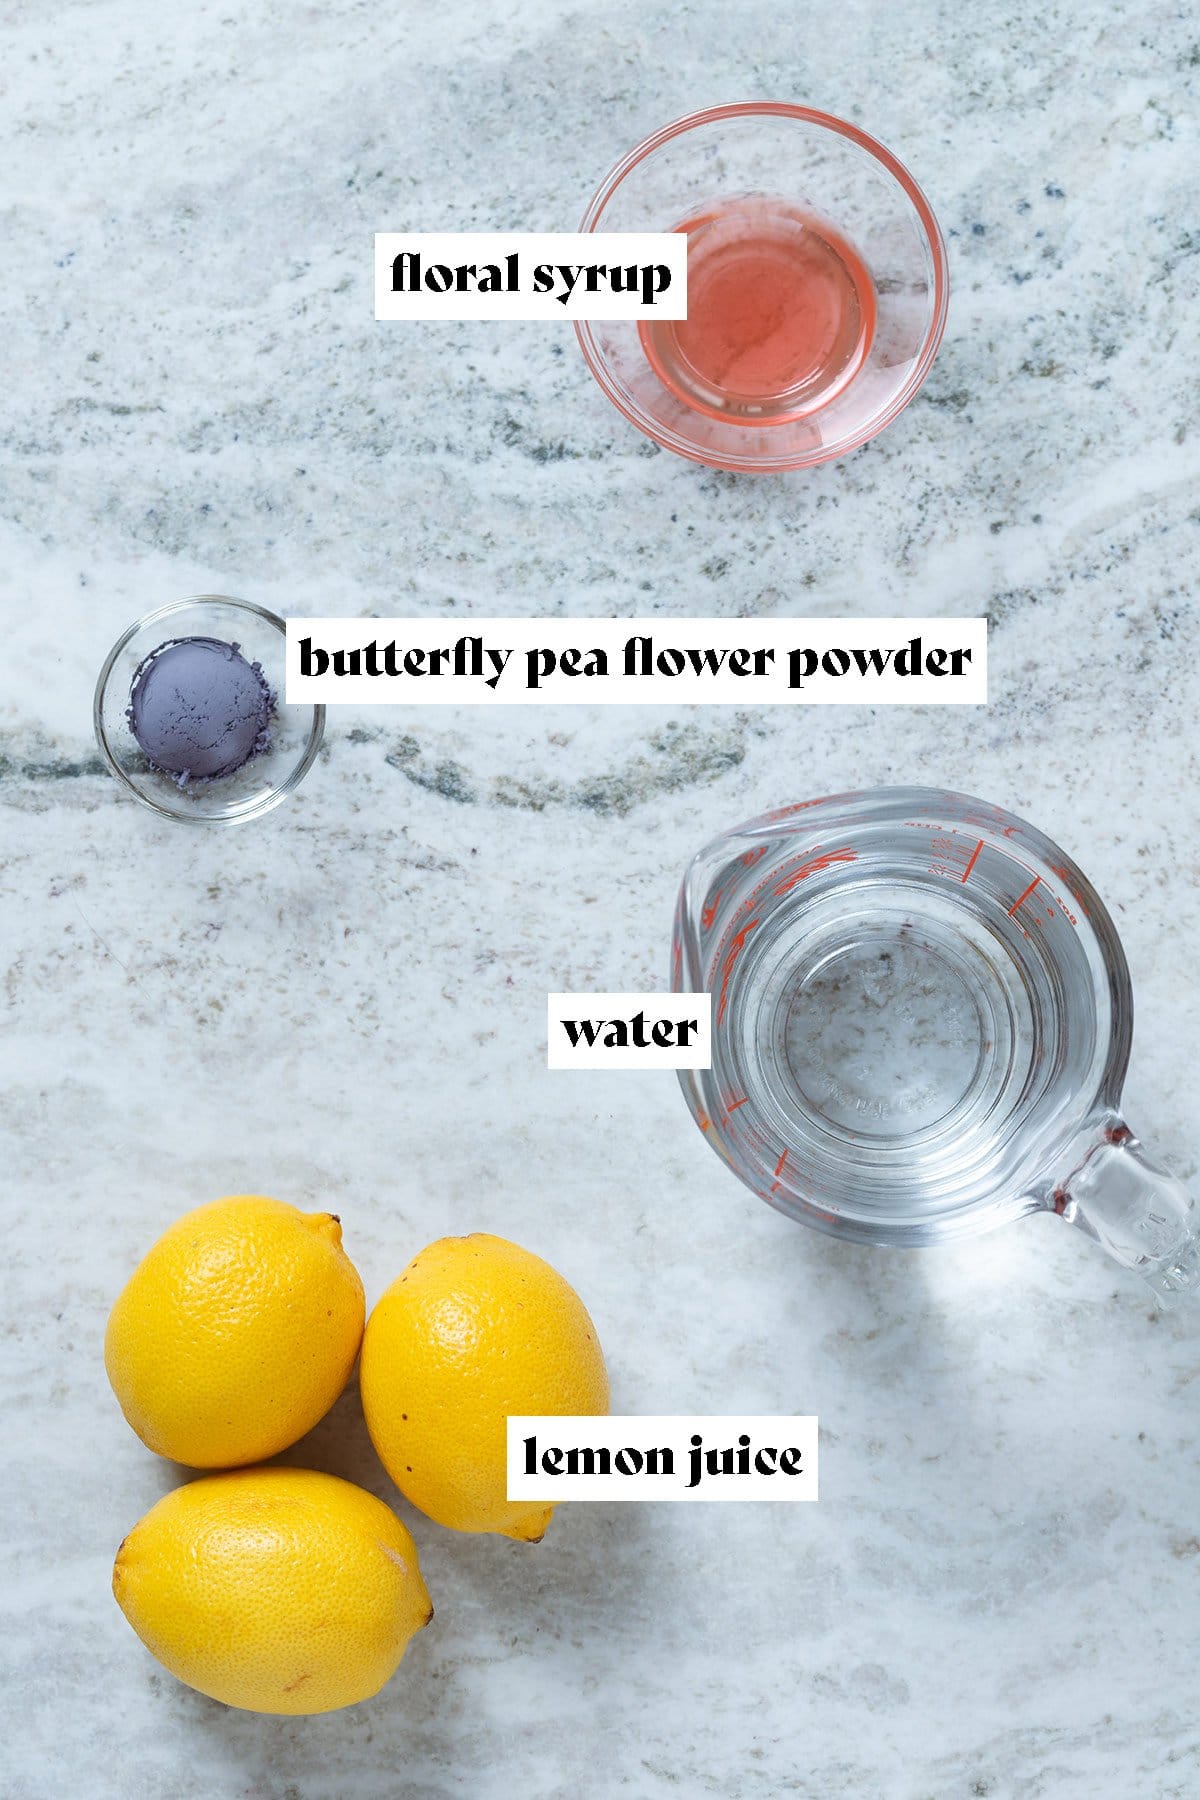 Lemons, blue powder, water, and pink syrup measured in bowls all laid out on a grey background with text overlay.